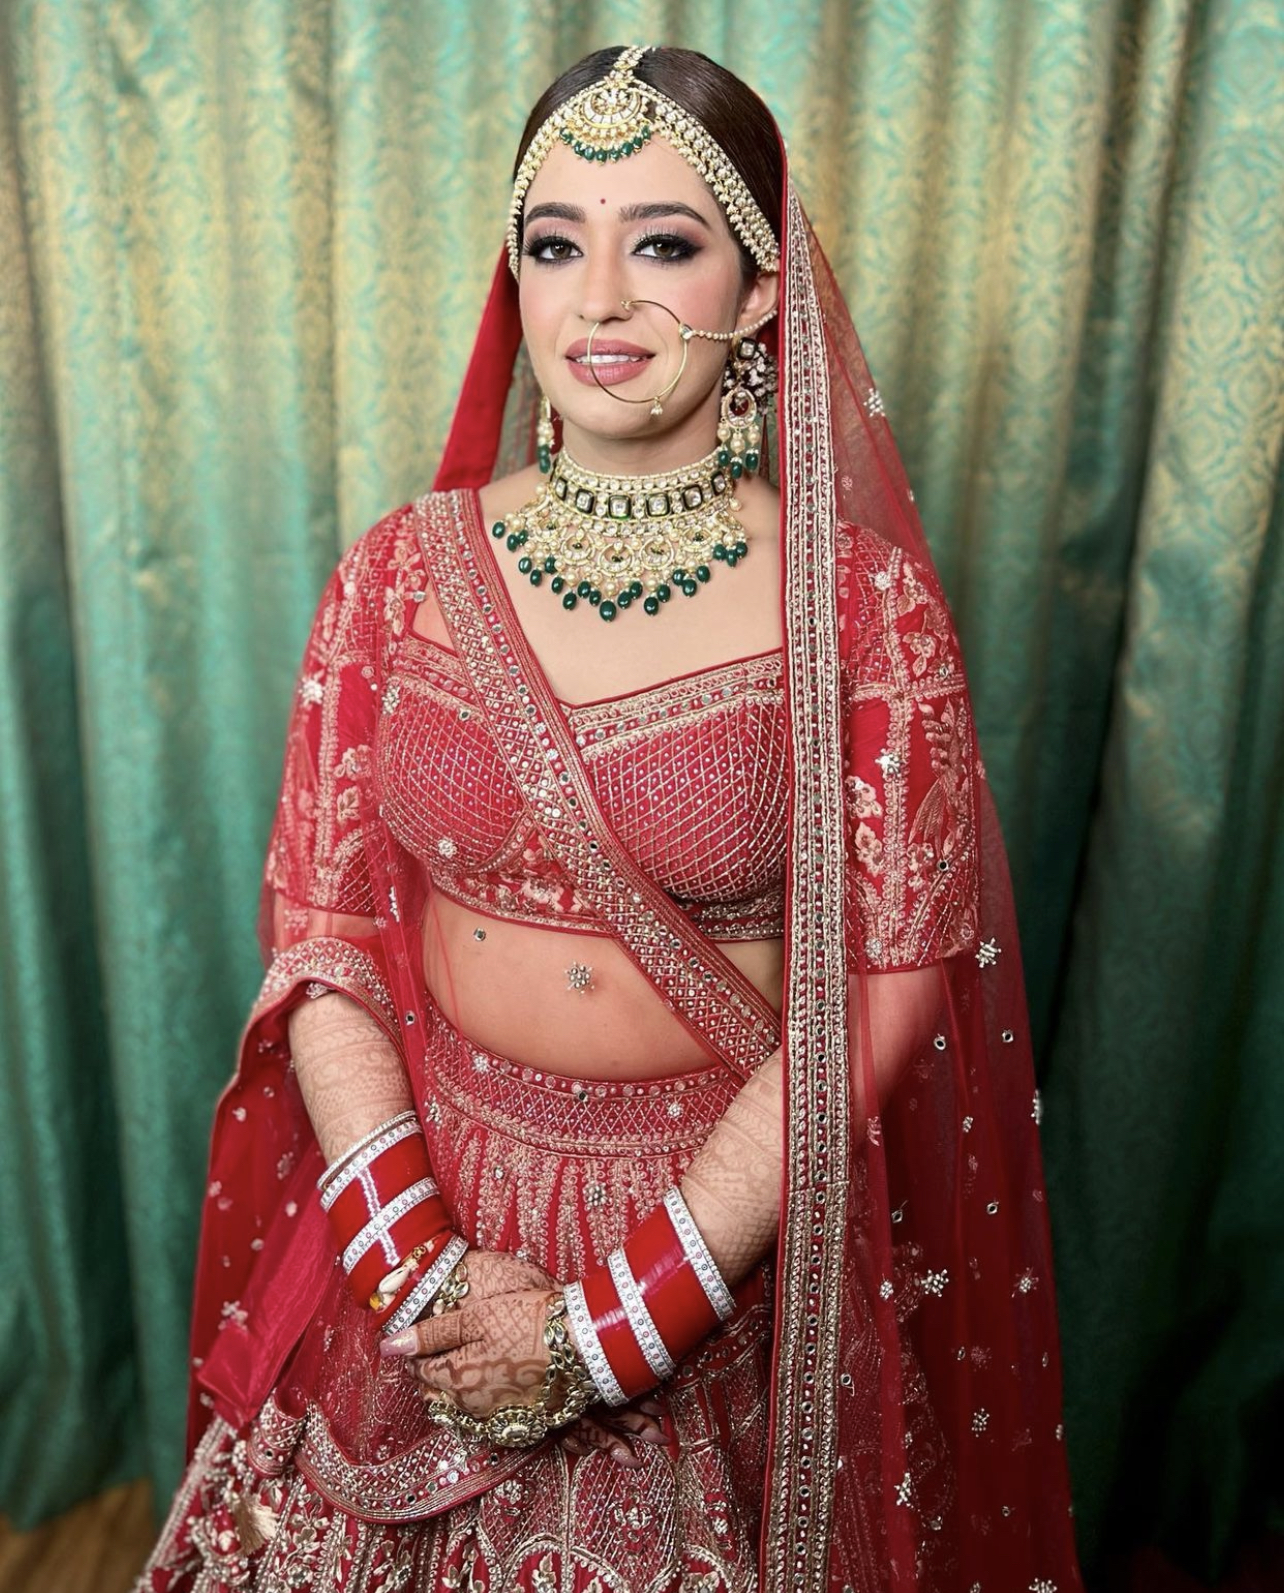 Bridal Makeup in Affordable Price | by Saira shahzaad | Medium